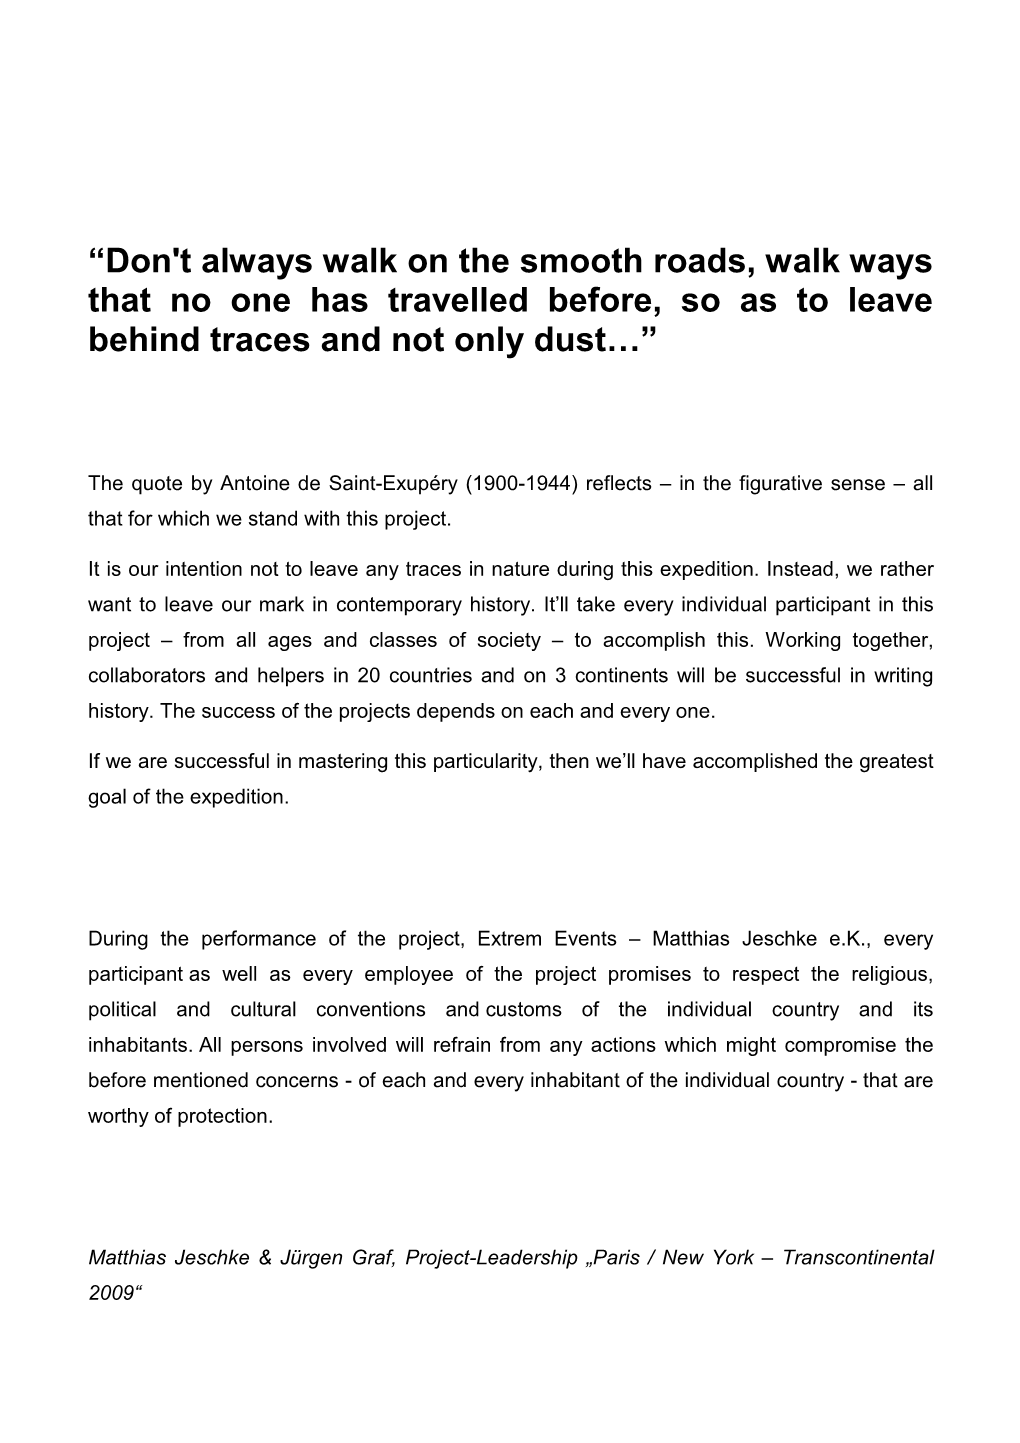 Don't Always Walk on the Smooth Roads, Walk Ways That No One Has Travelled Before, So As to Leave Behind Traces and Not Only Dust…”